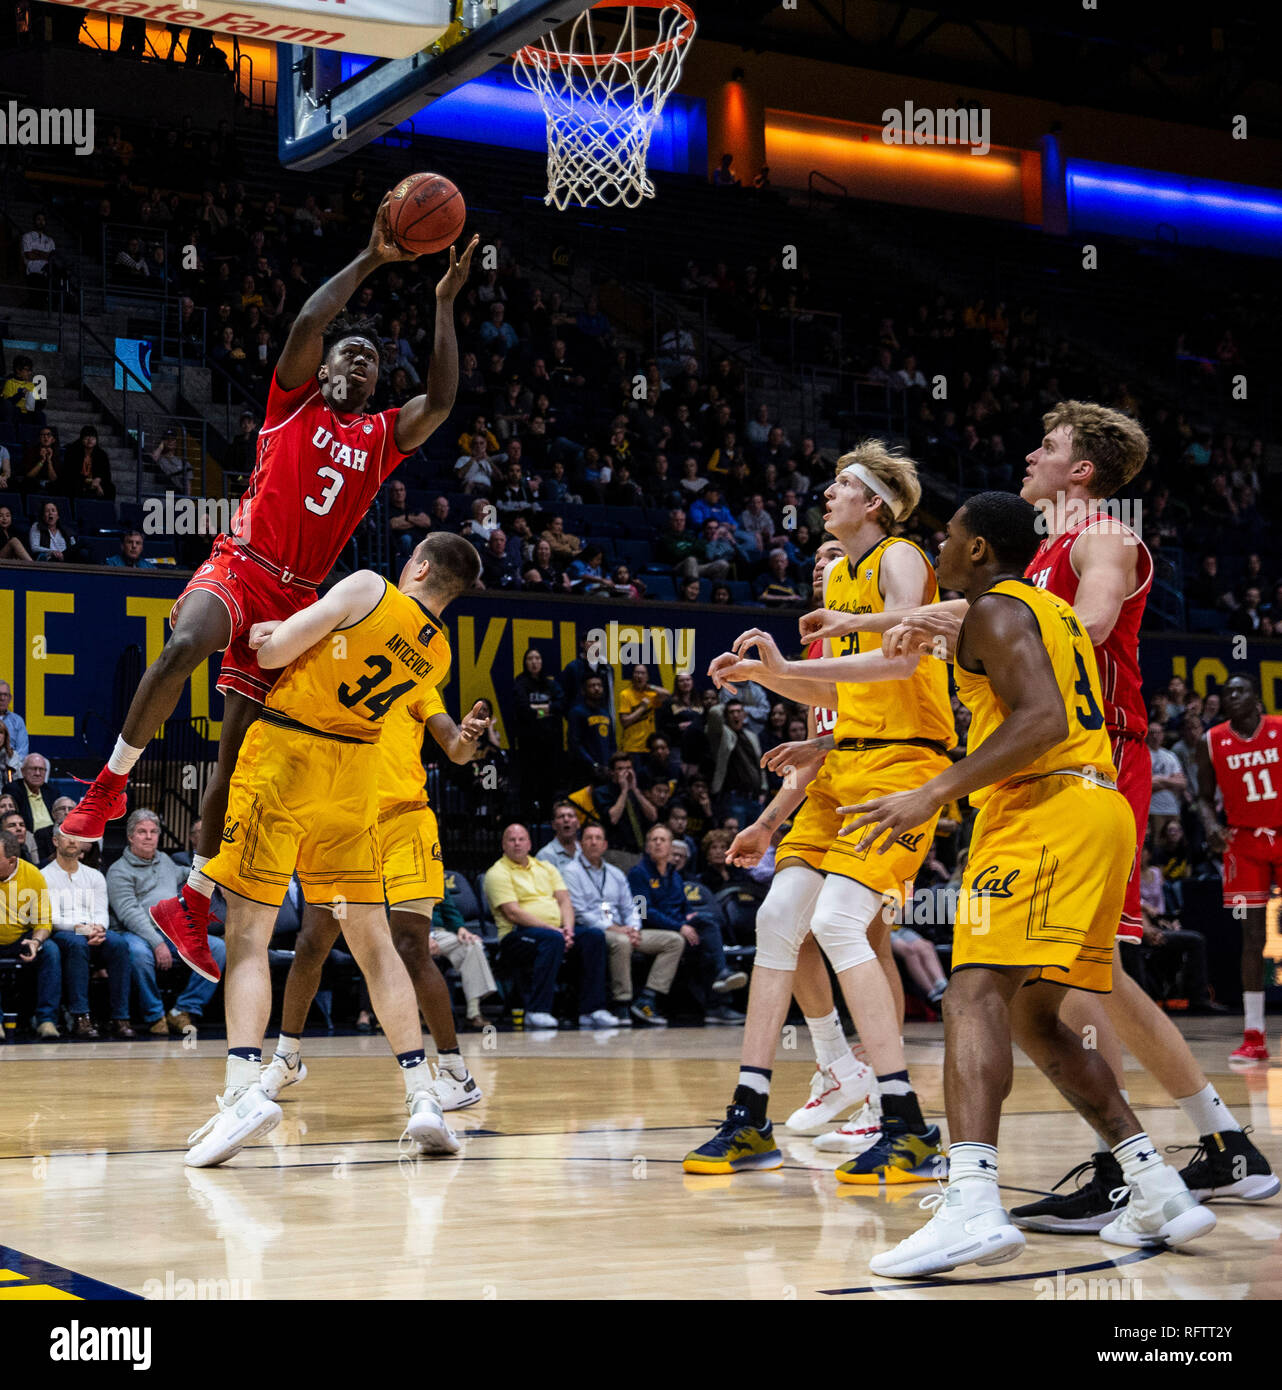 Berkeley, CA U.S. 26th Jan, 2019. A. Utah forward Donnie Tillman (3) drives to the basket during the NCAA Men's Basketball game between Utah Utes and the California Golden Bears 64-82 lost at Hass Pavilion Berkeley Calif. Thurman James/CSM/Alamy Live News Stock Photo